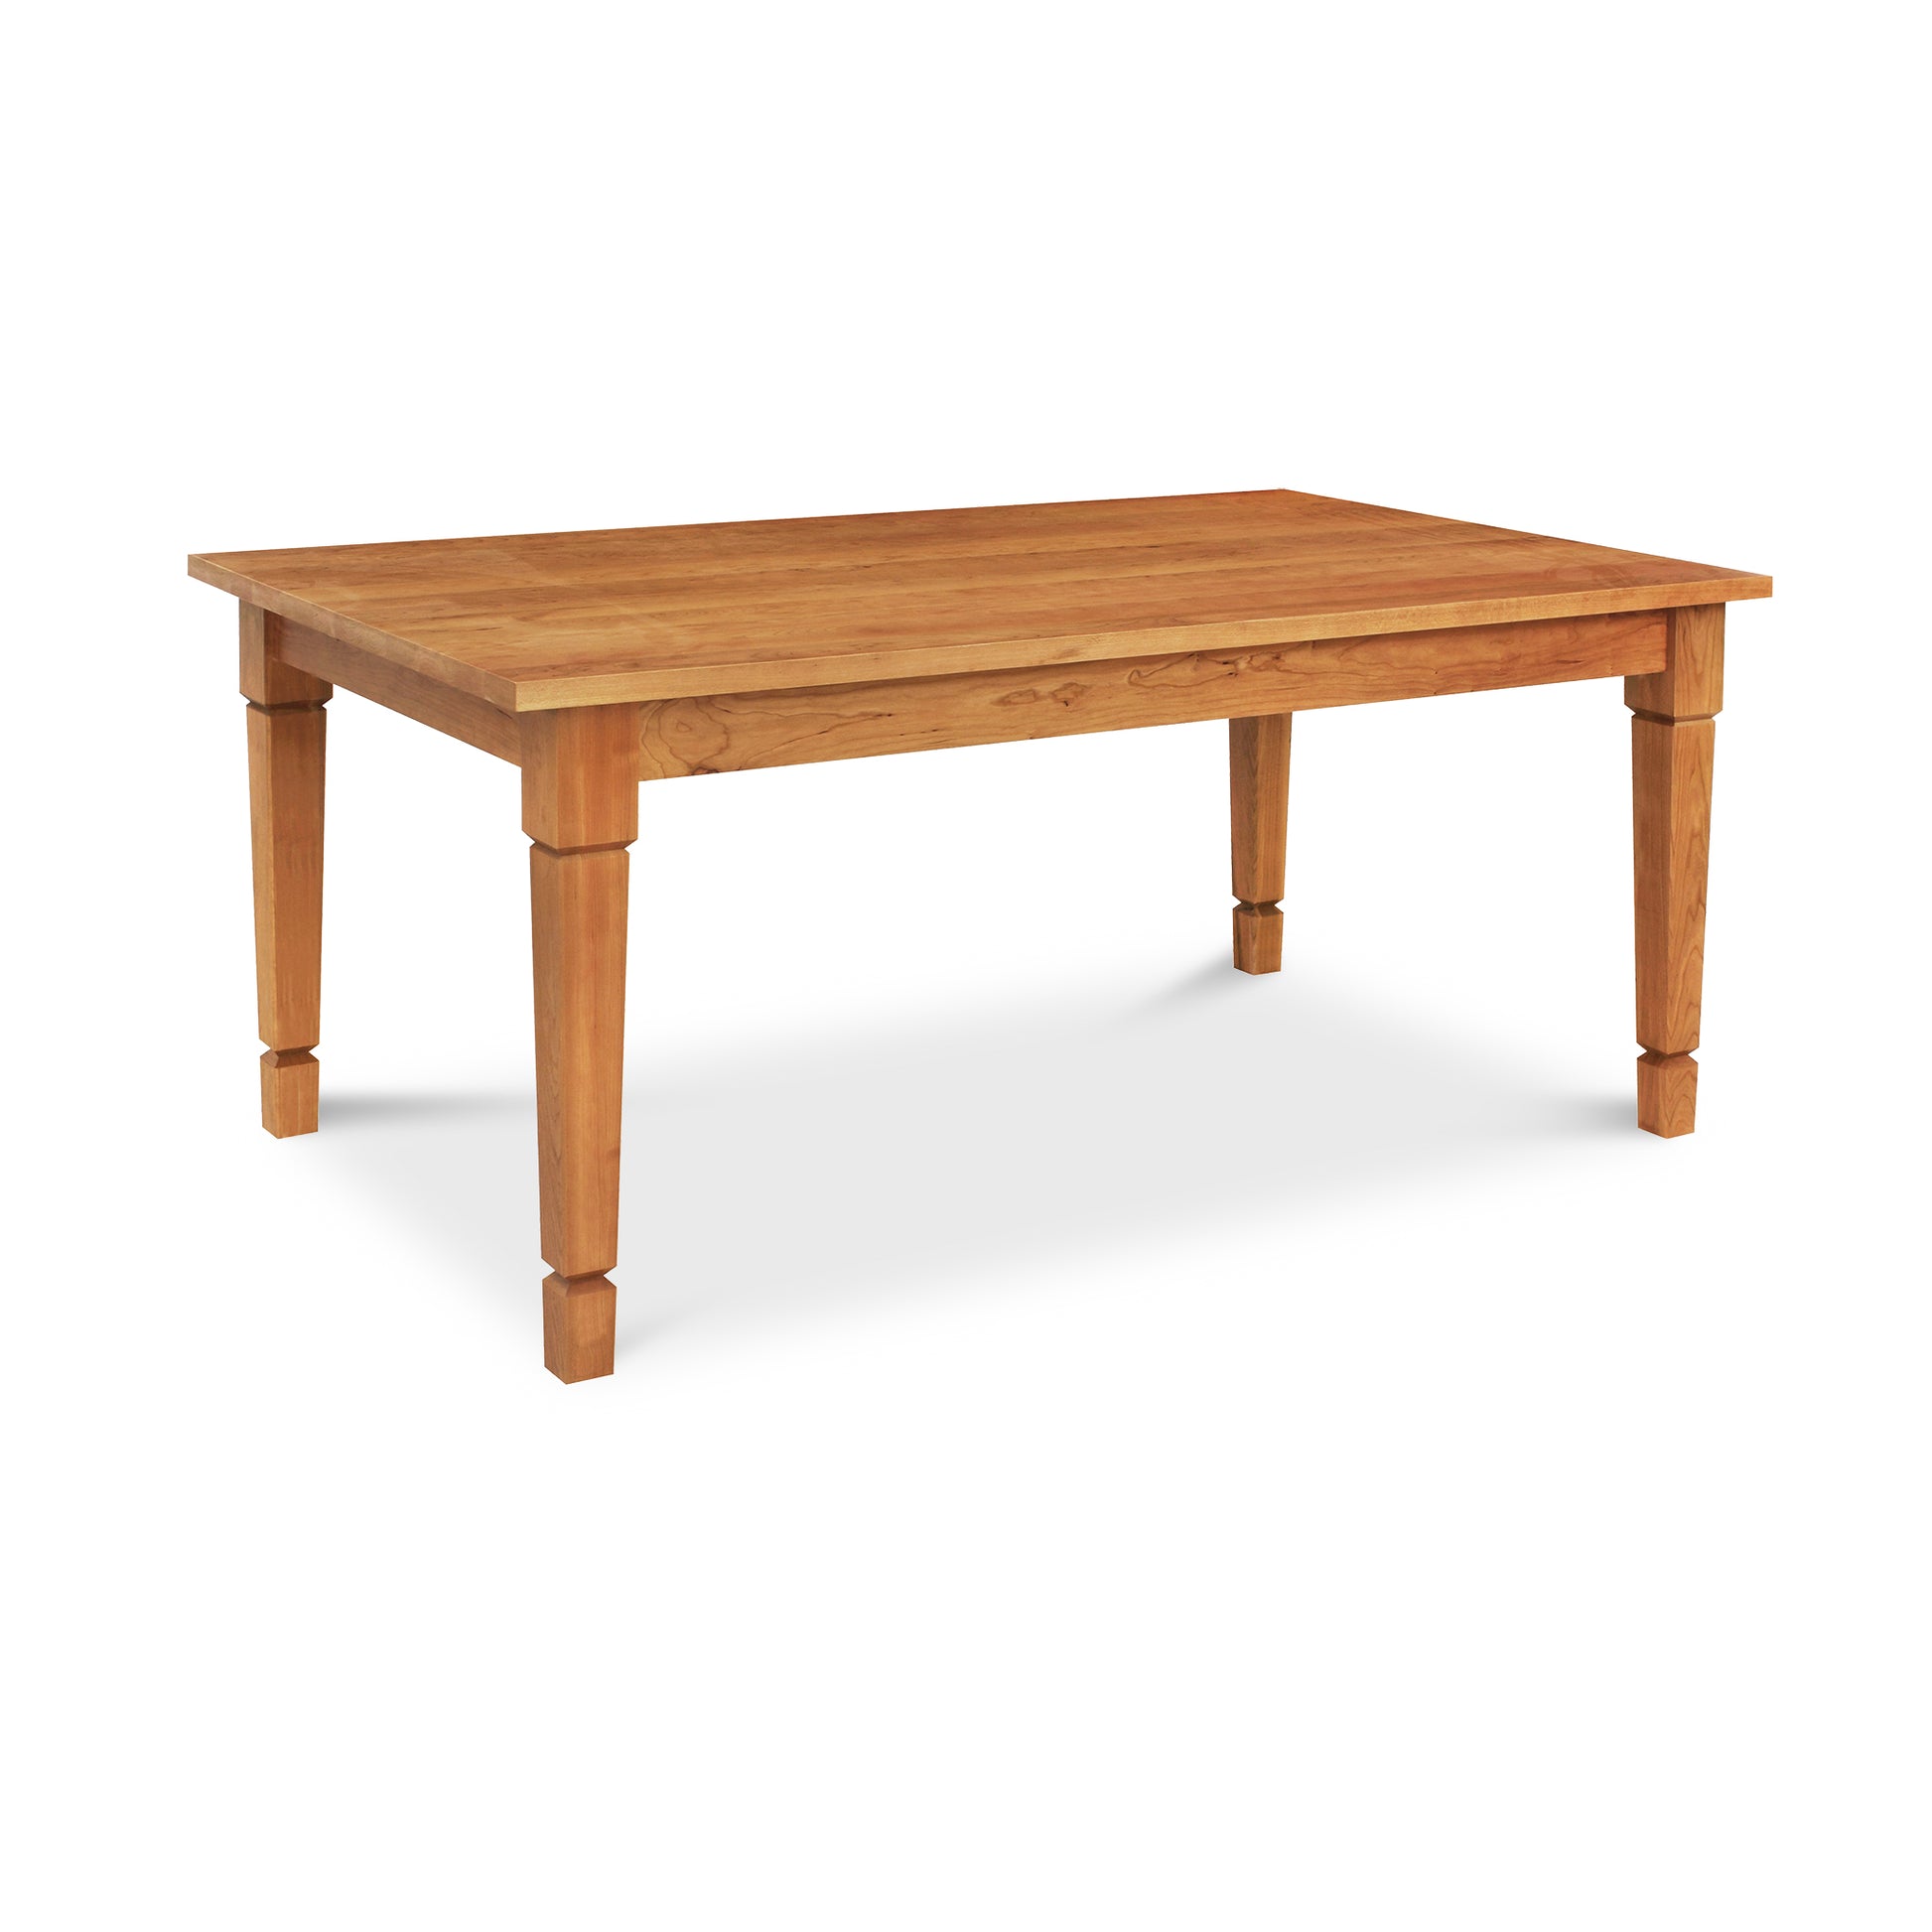 A American Craftsman Solid Top Dining Table from Lyndon Furniture with four sturdy legs on a white background, made of sustainably sourced hardwoods.